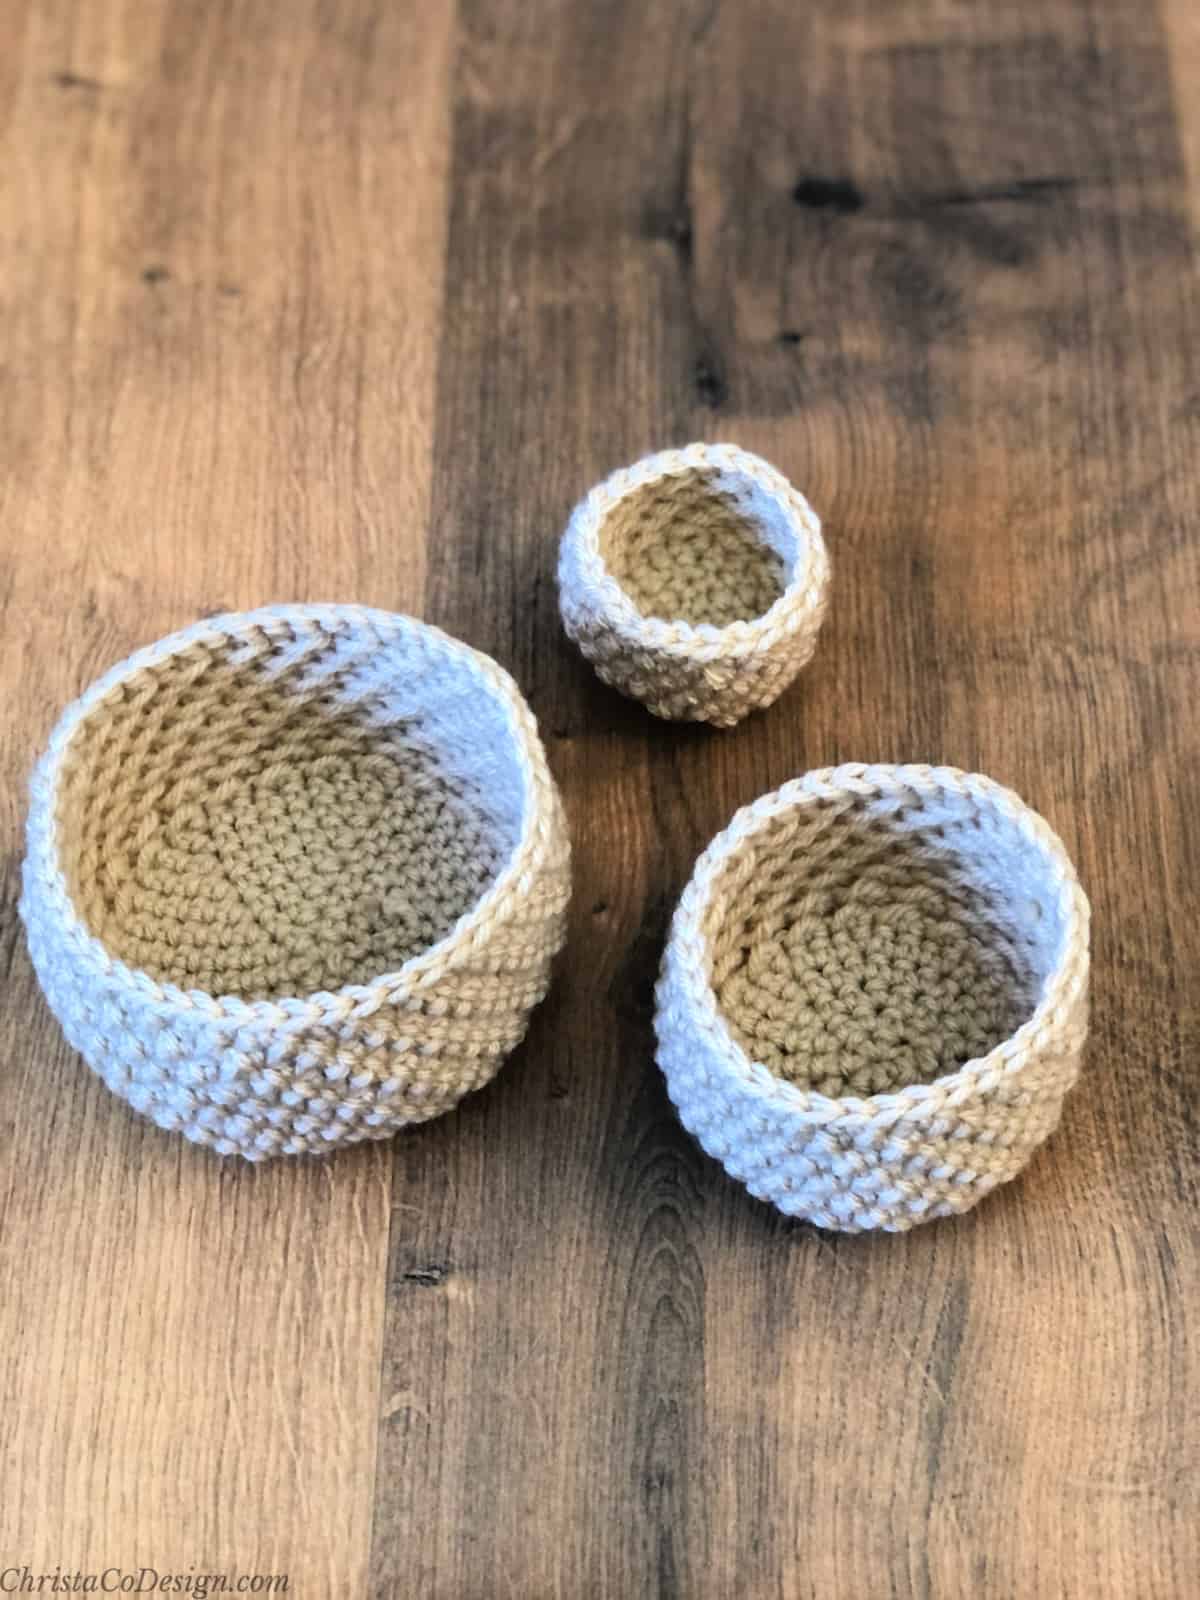 Three small crochet baskets set in a triangle on wood table.